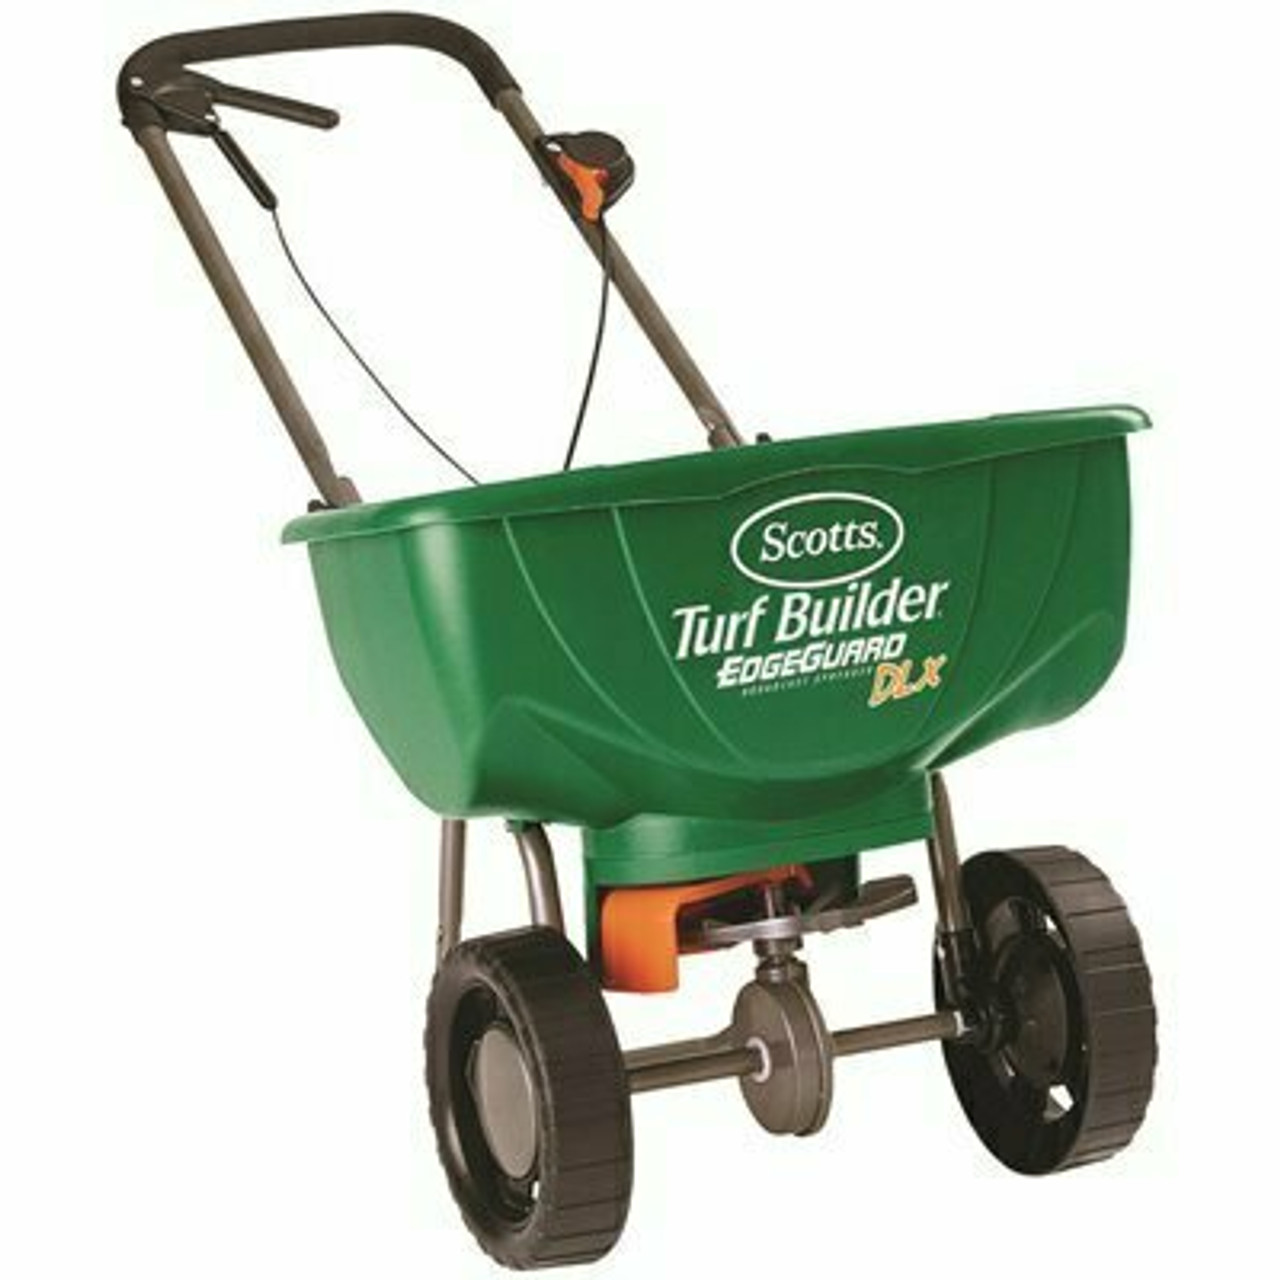 Scotts 15,000 Sq. Ft. Turf Builder Edgeguard Dlx Broadcast Spreader For Seed, Fertilizer, And Ice Melt